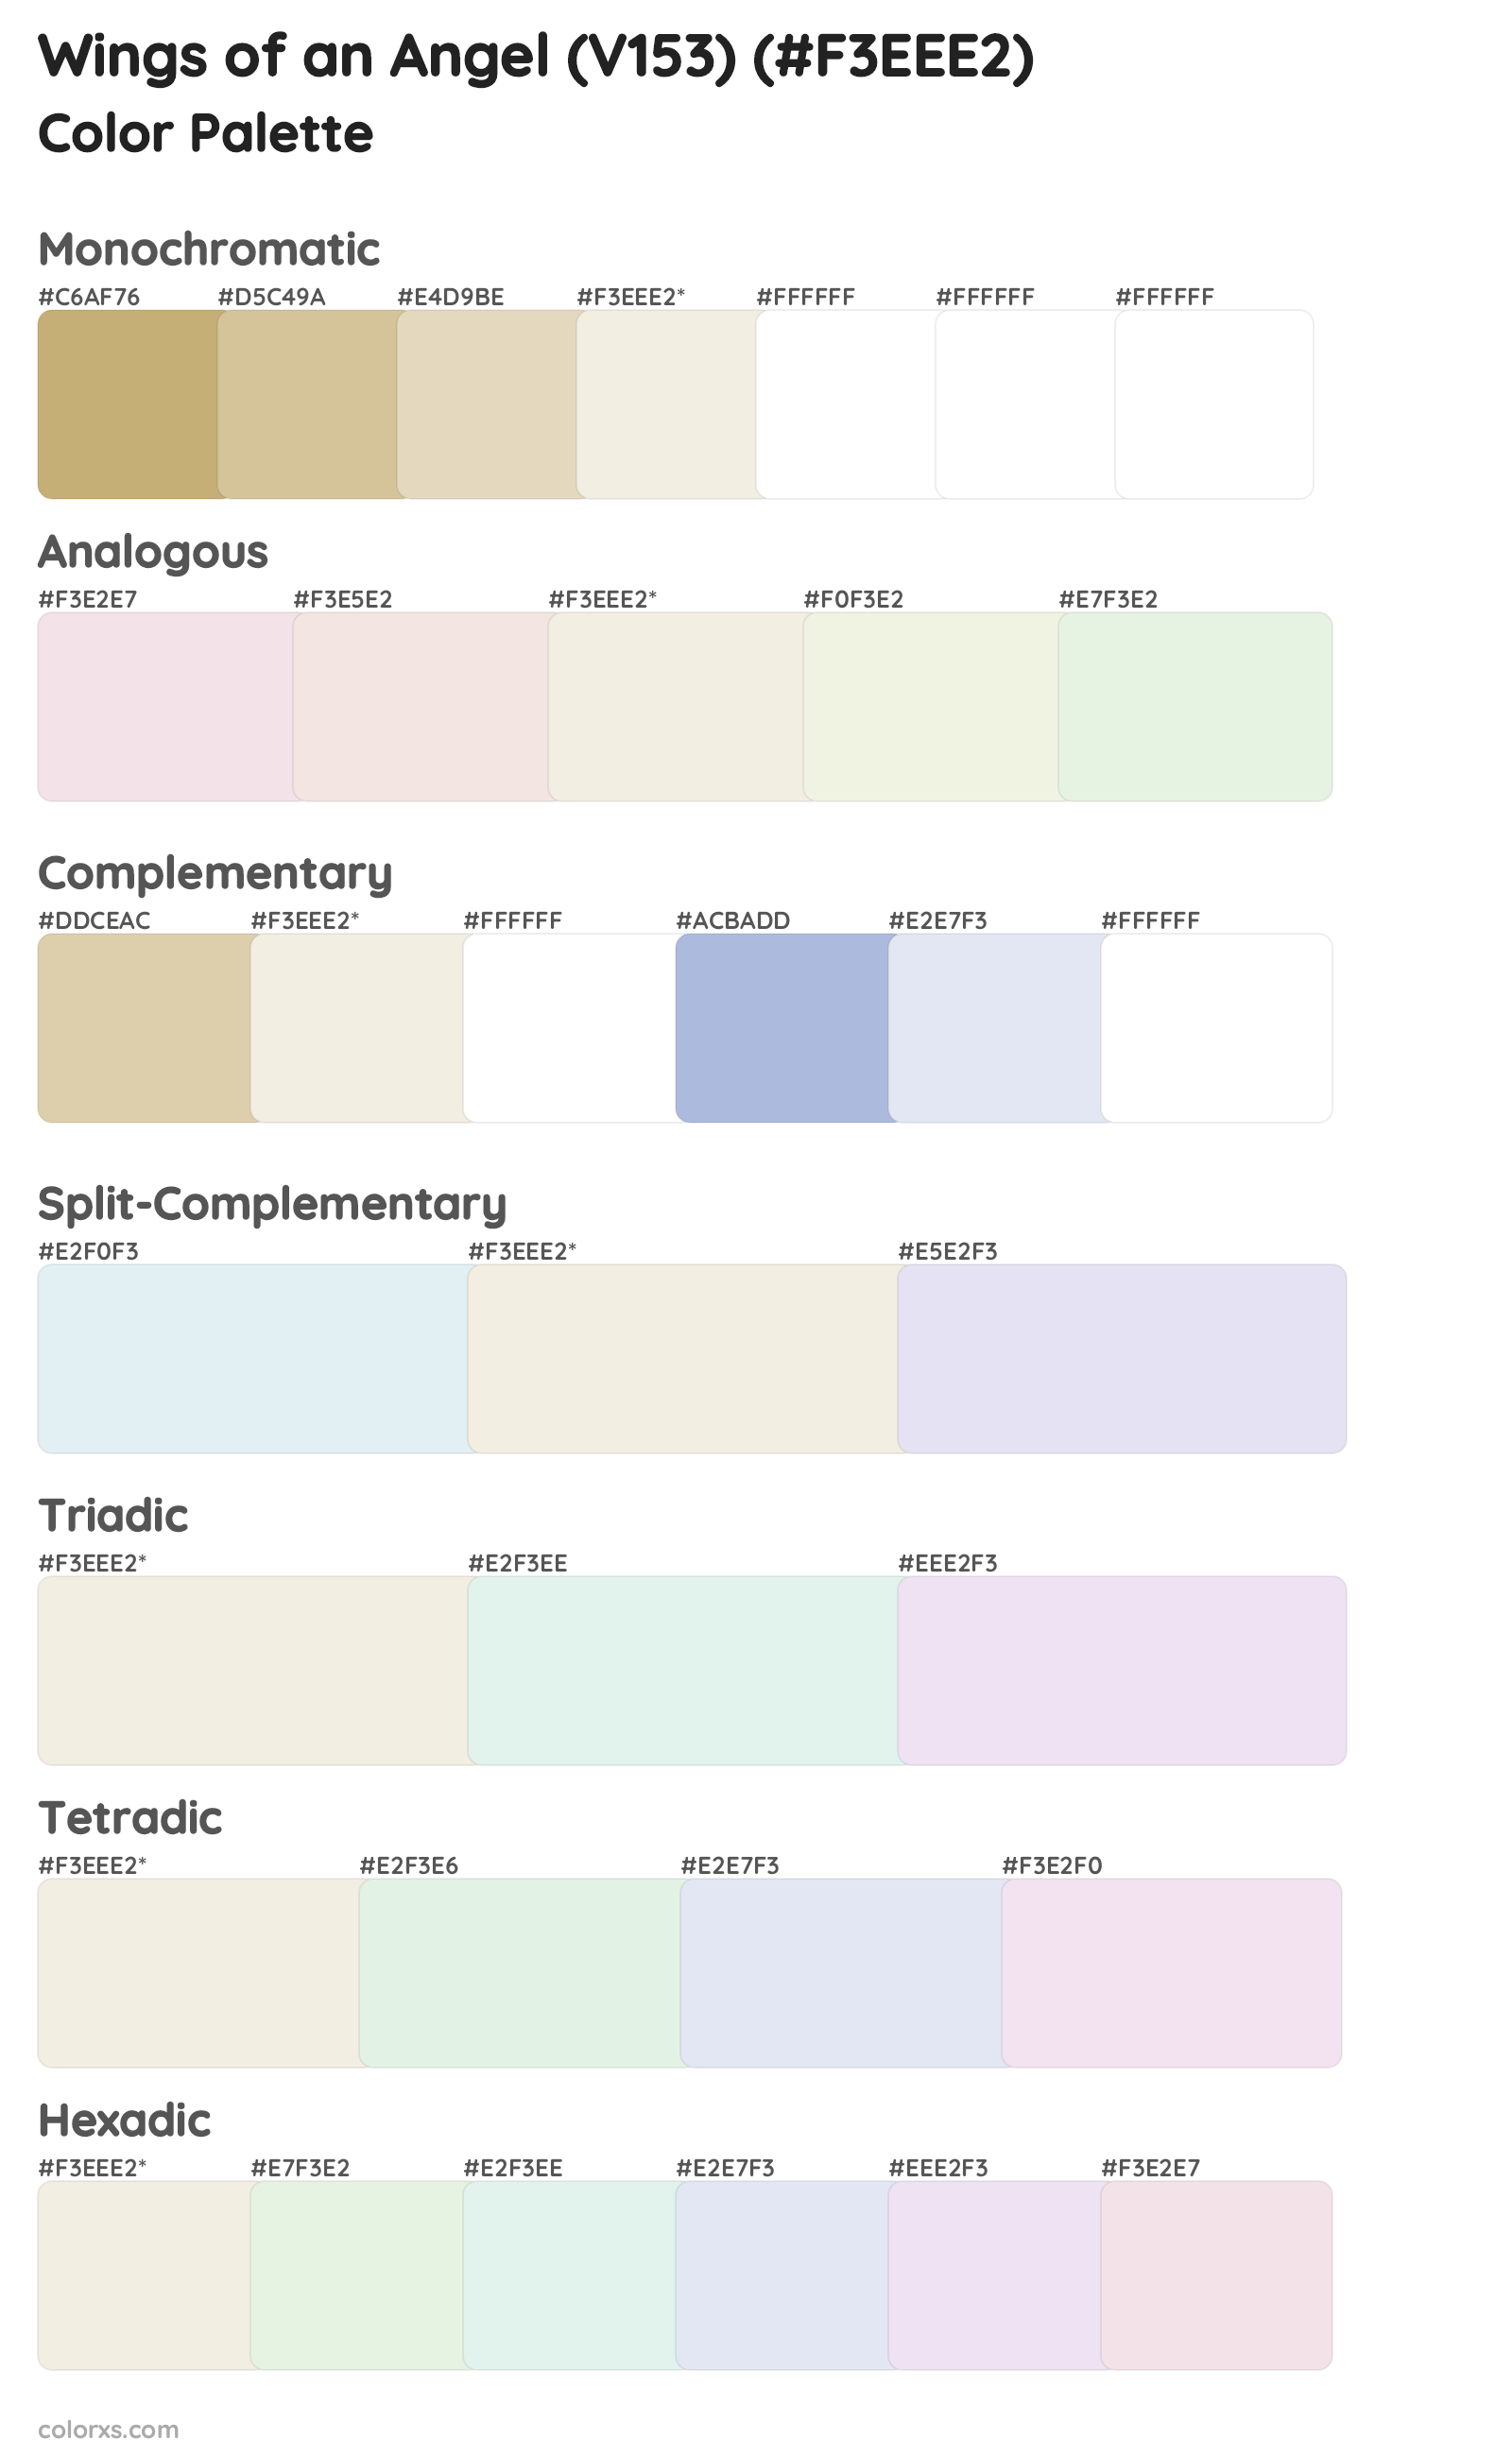 Wings of an Angel (V153) Color Scheme Palettes